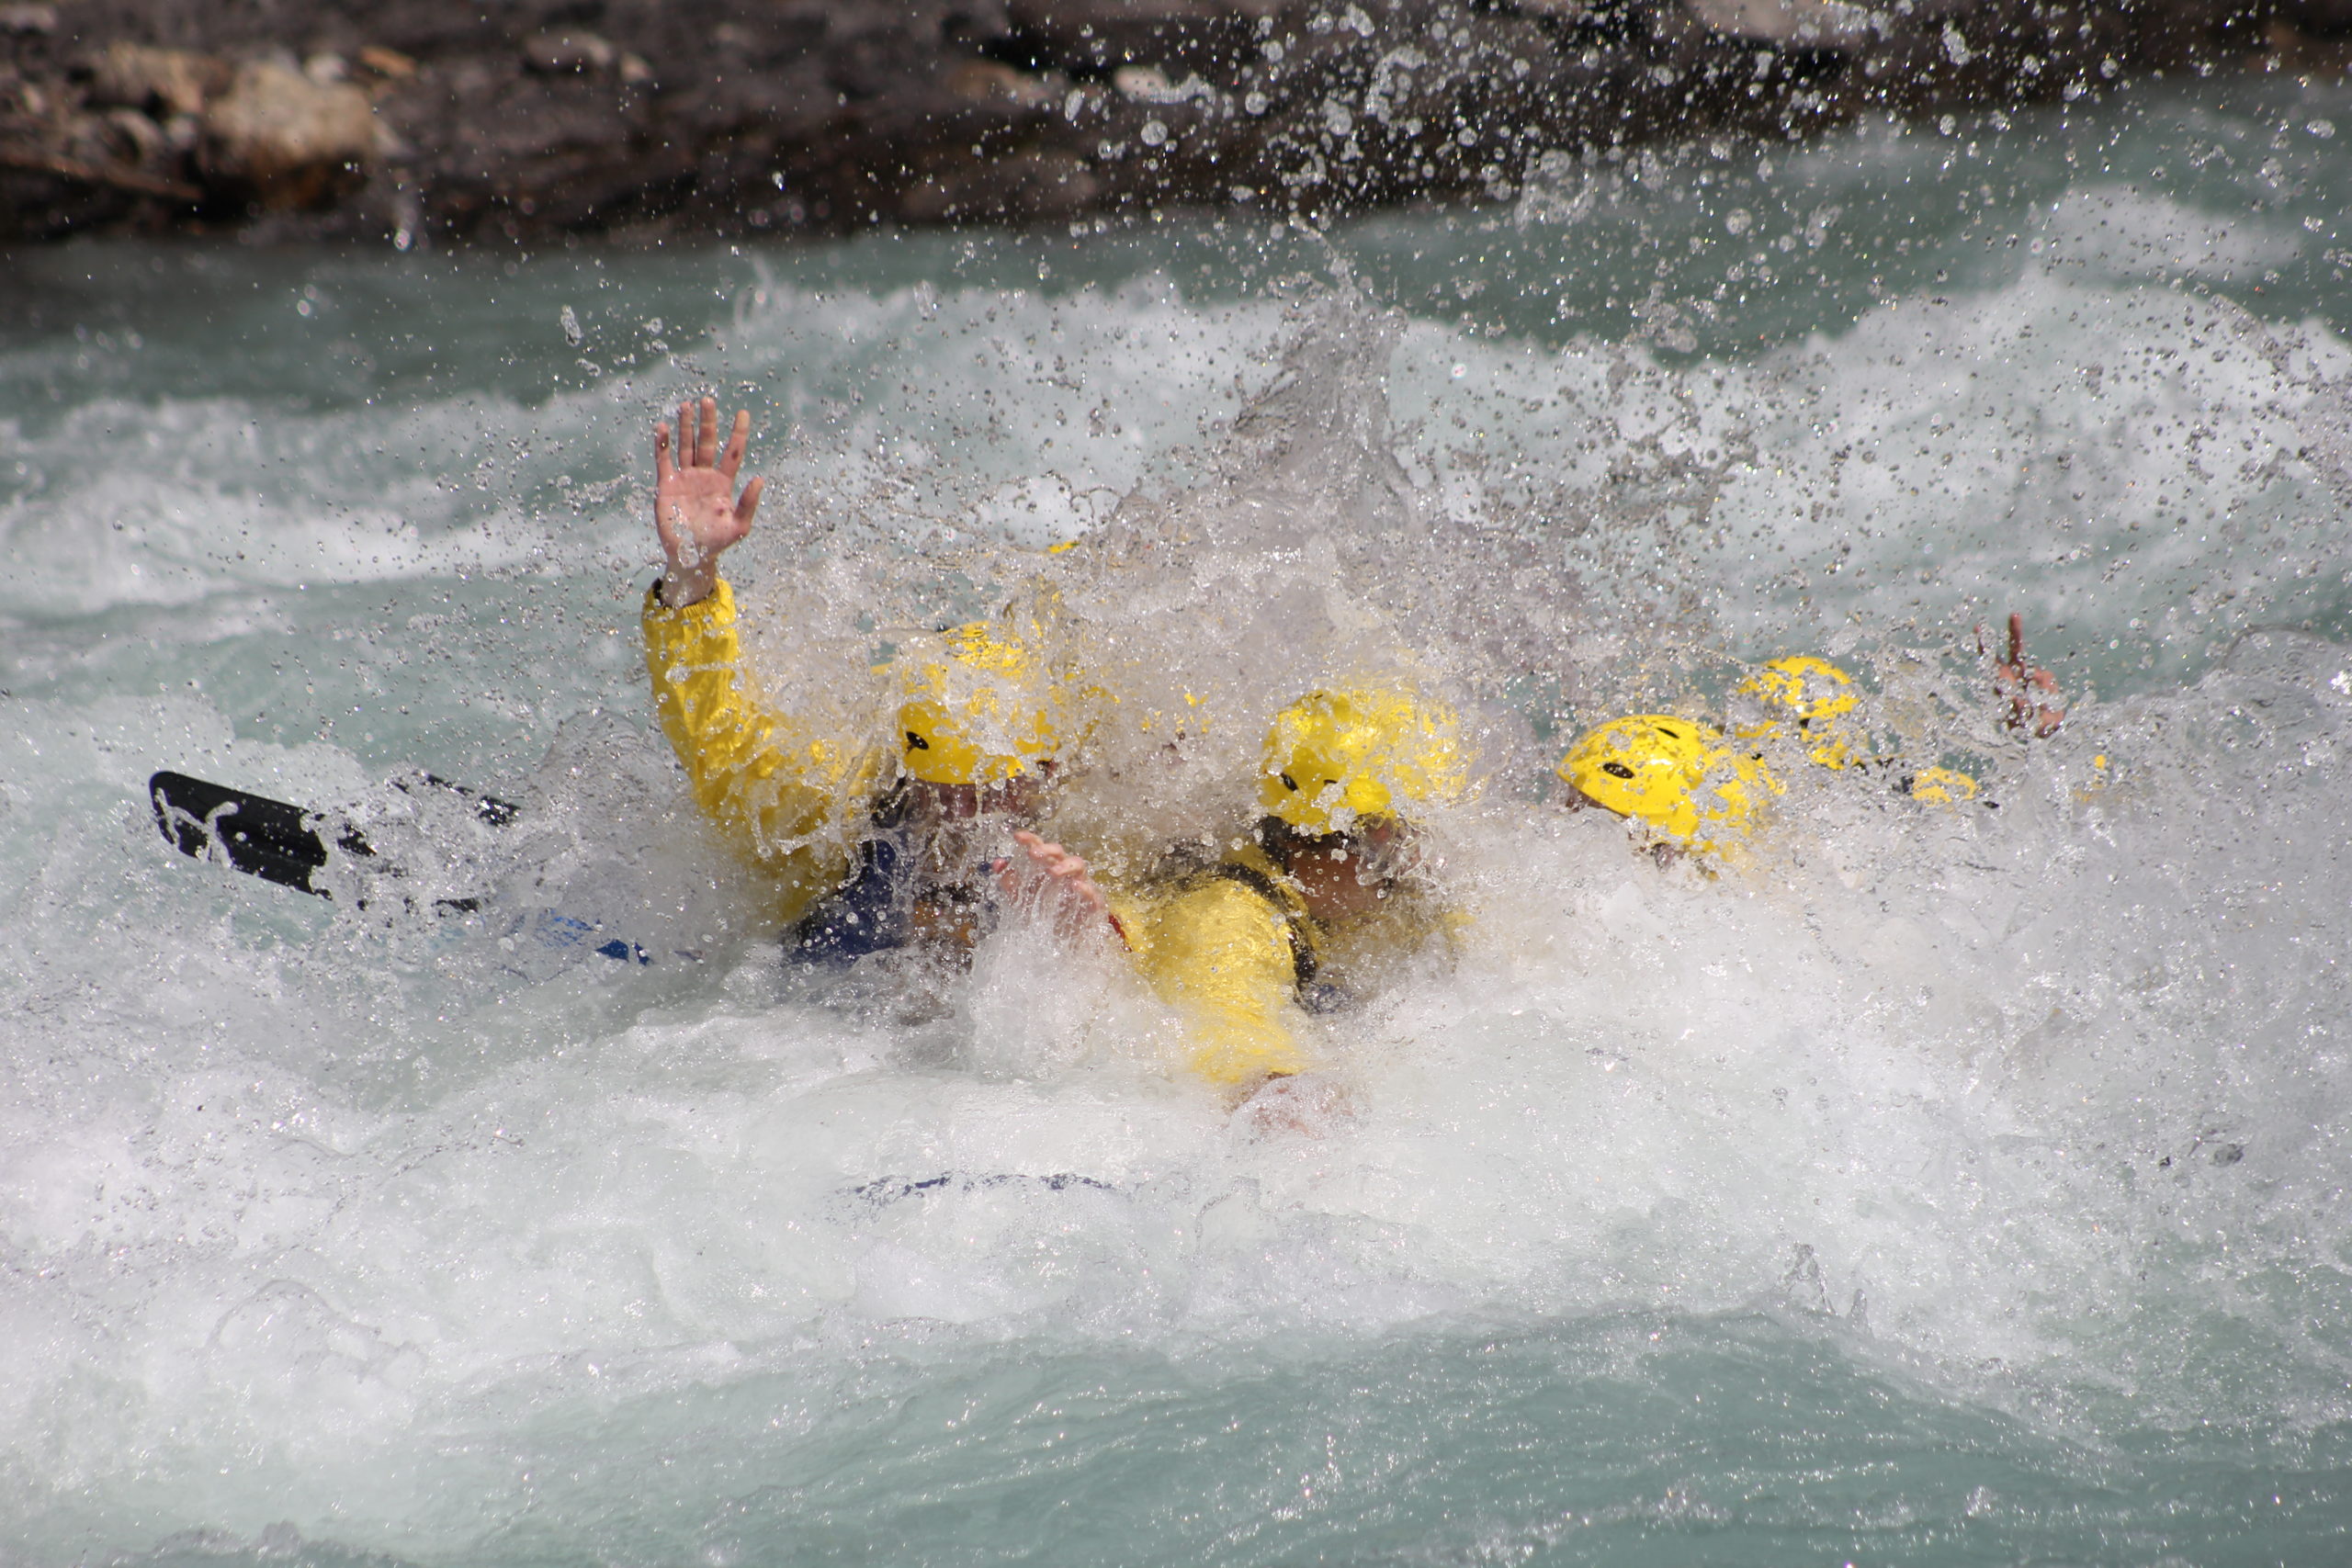 Whitewater Rafting The Kicking Horse River In The Rain